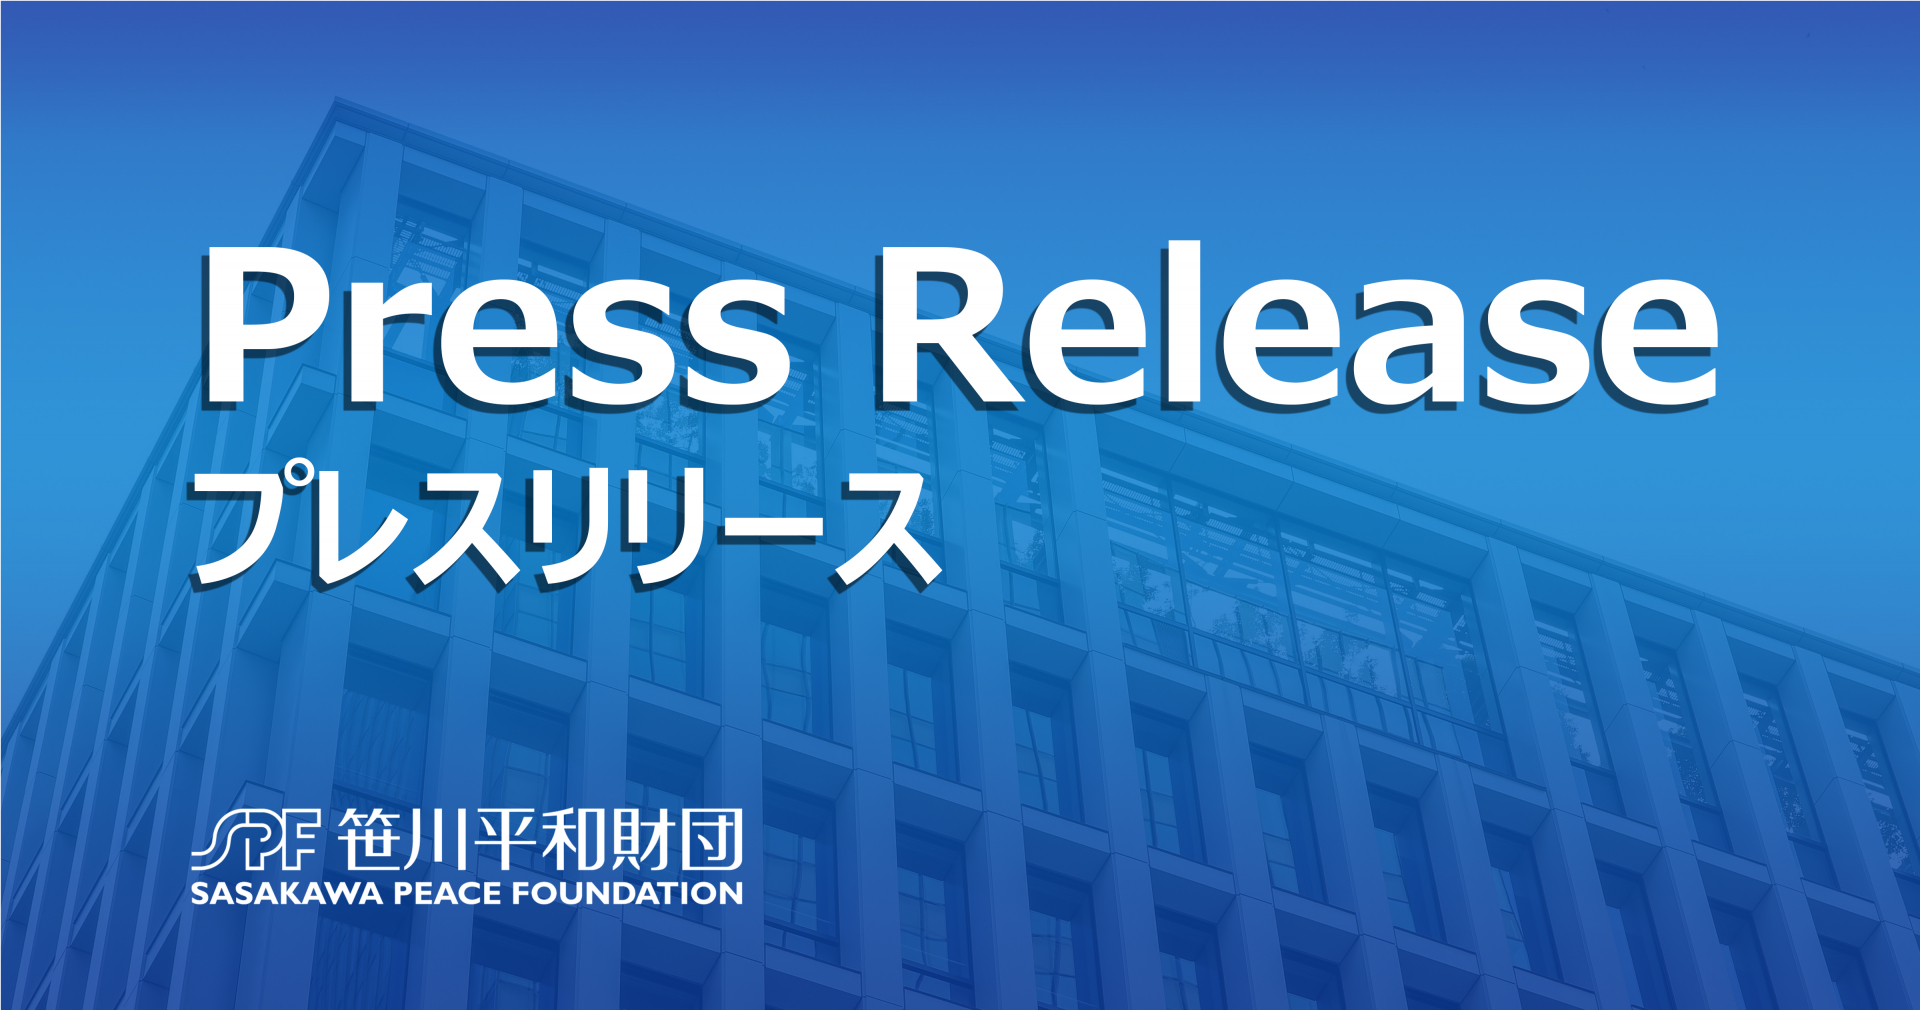 Private sector facilitates support in Japan for people displaced from Ukraine<br>Support Center for Refugees Japan (Support-R) to open on May 19, 2022